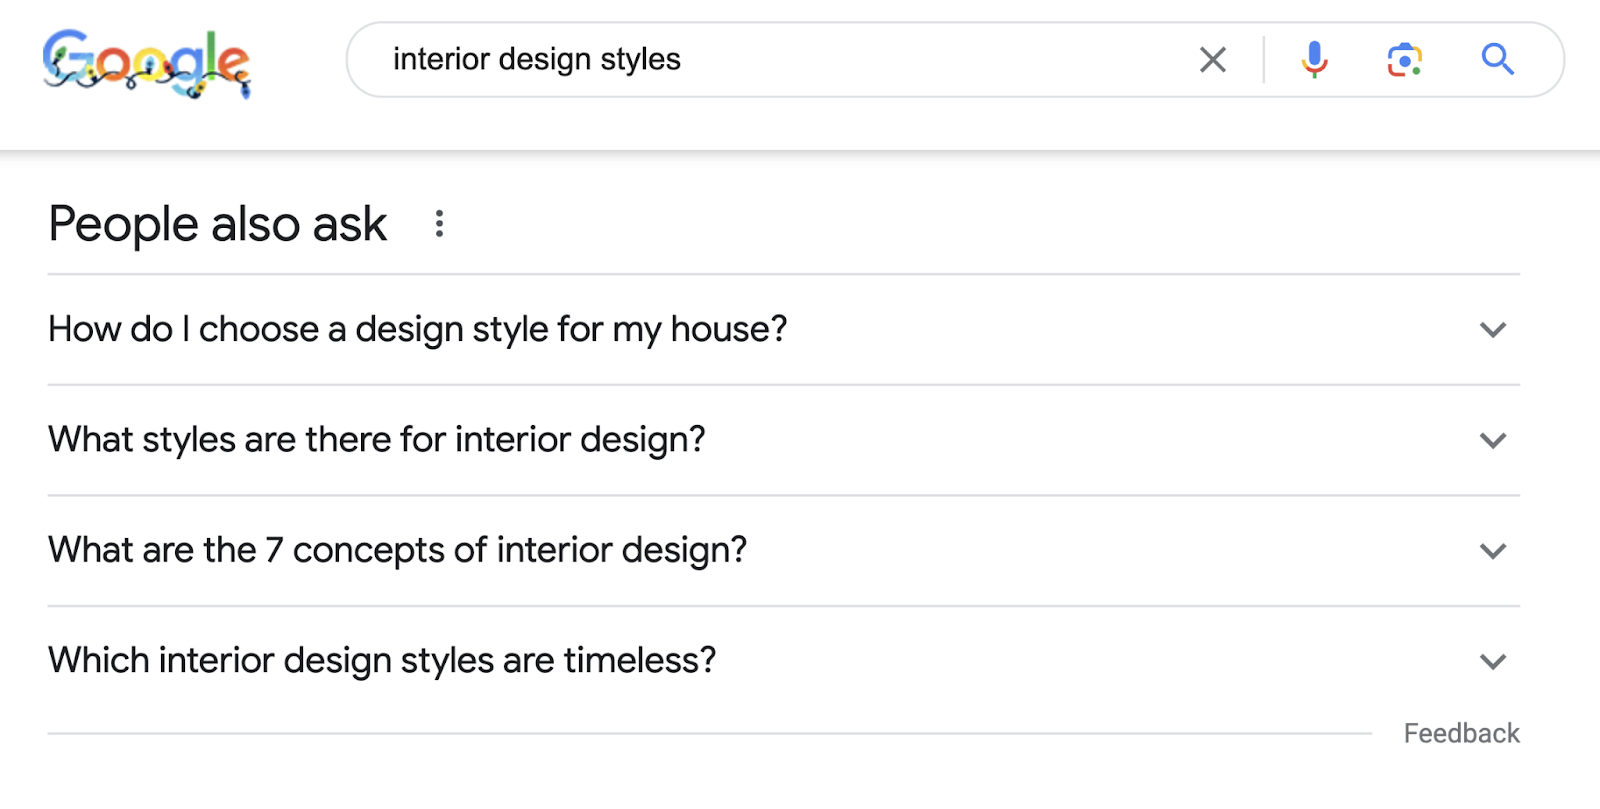 “People also ask” section for "interior design styles" query